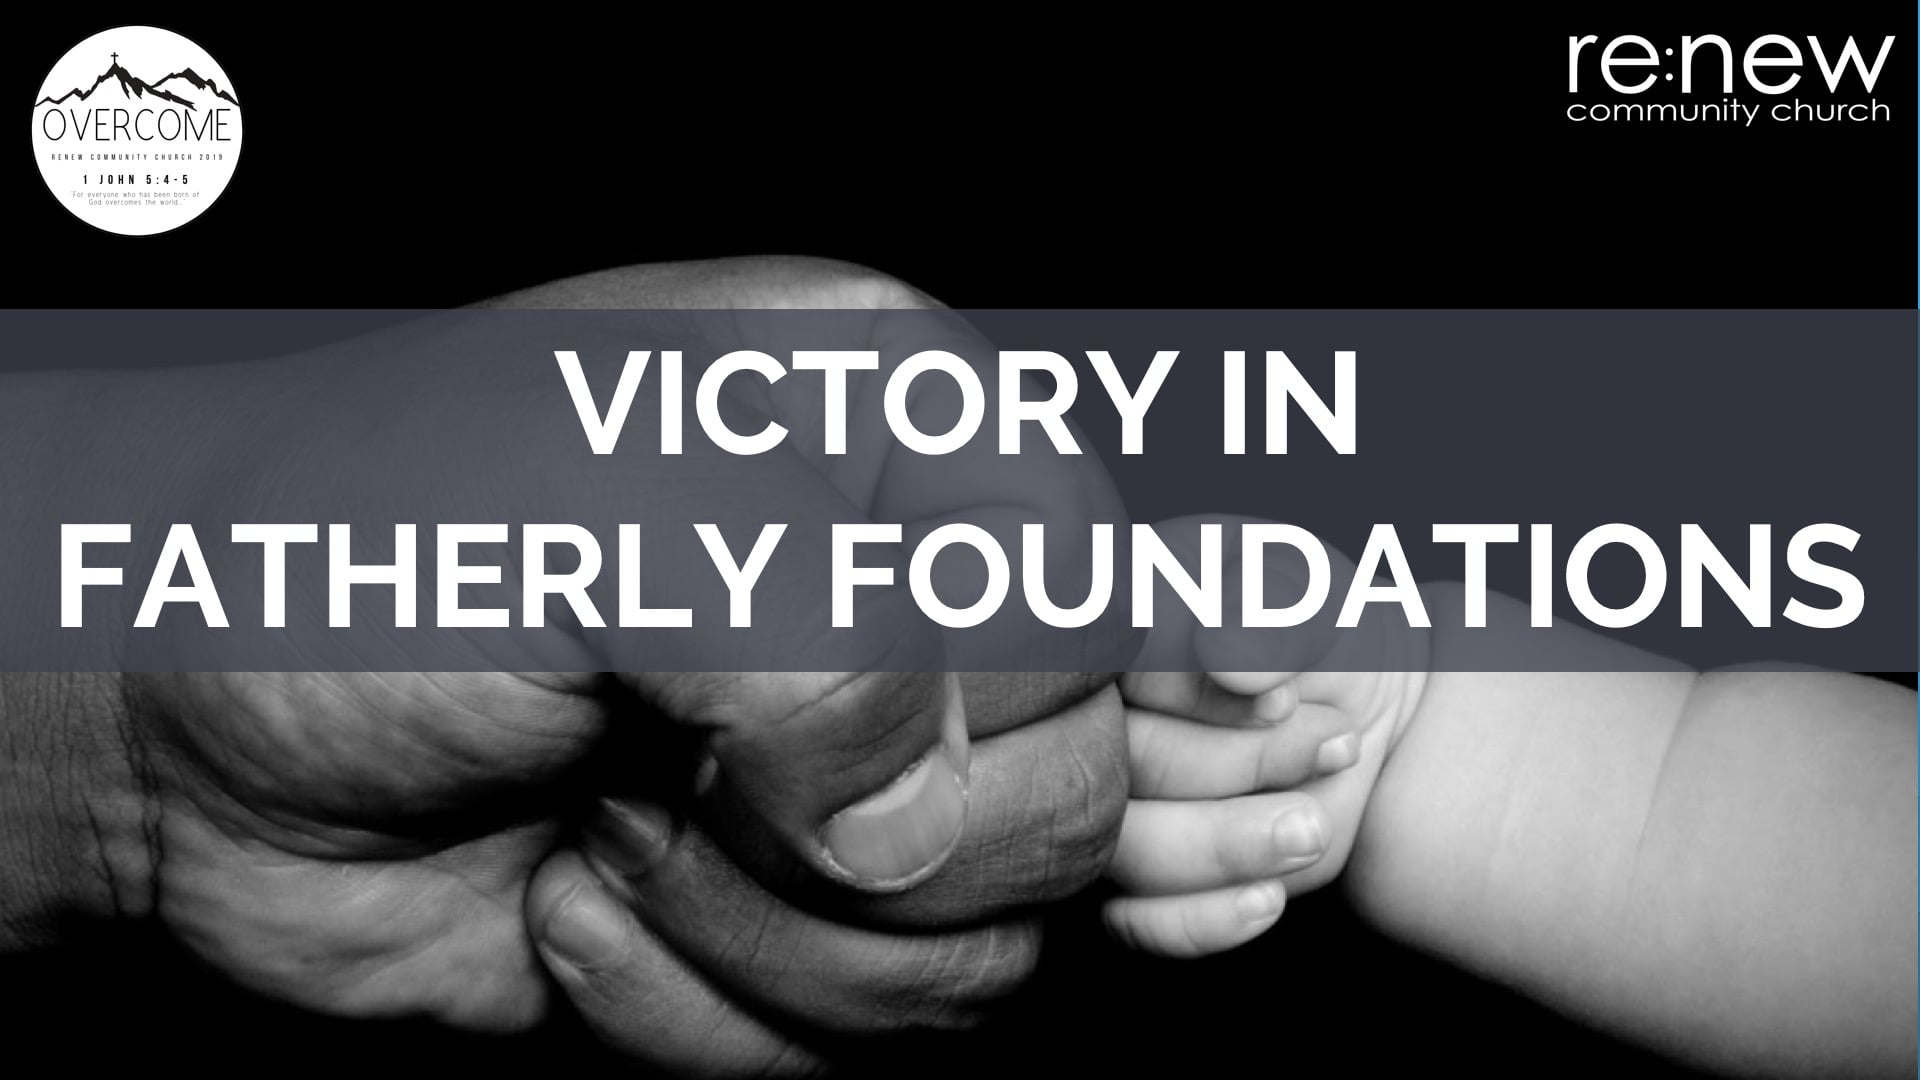 Victory in Fatherly Foundations